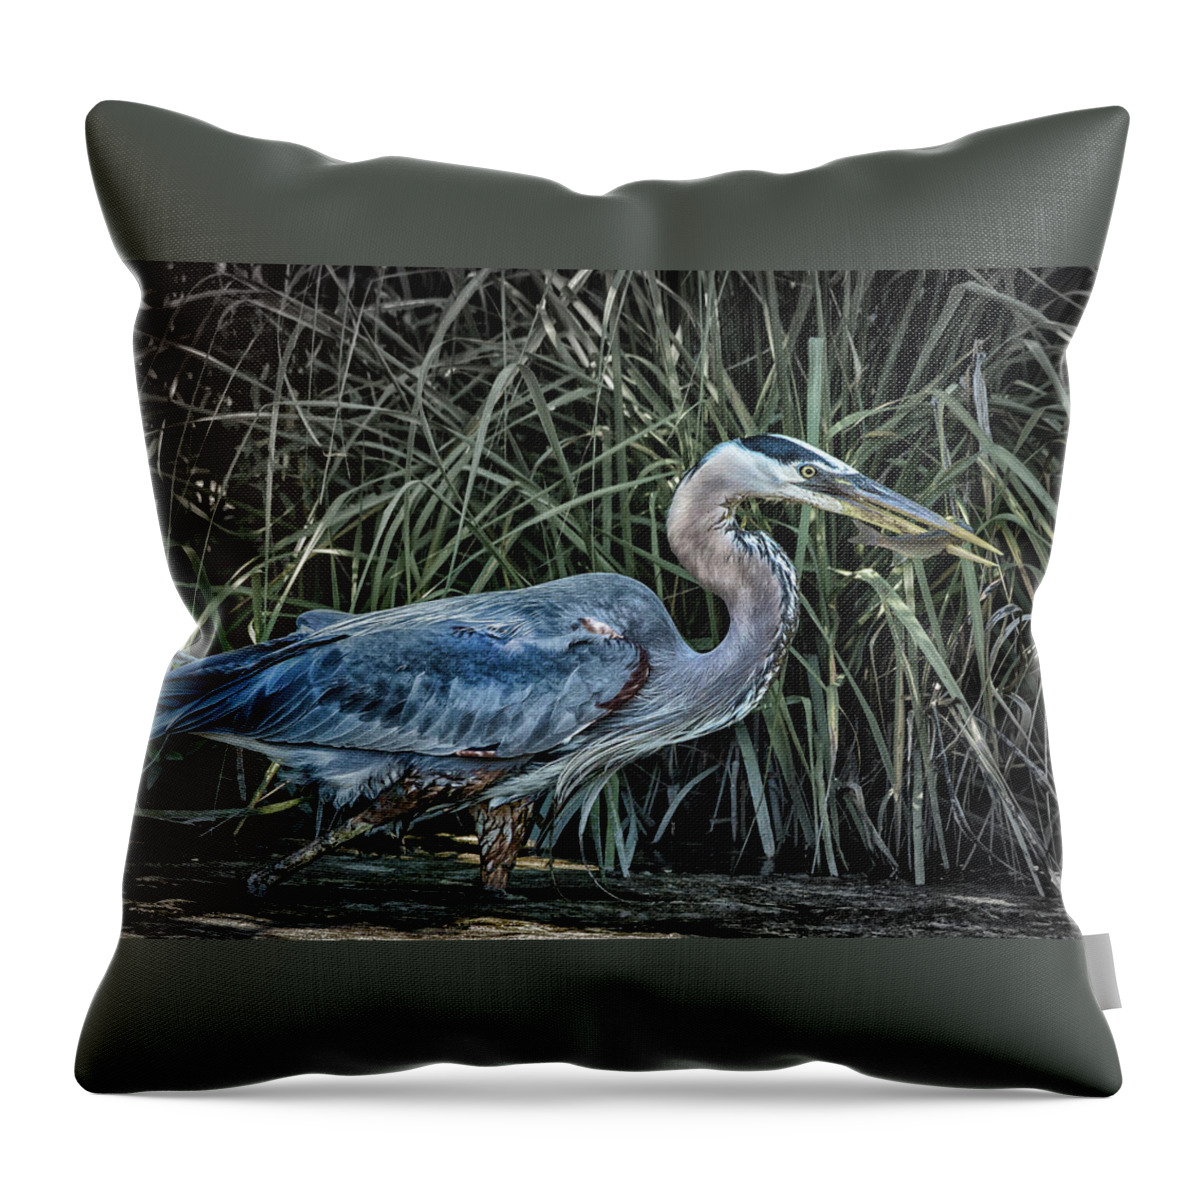 Birds Throw Pillow featuring the photograph Tasty Treat by Ray Silva